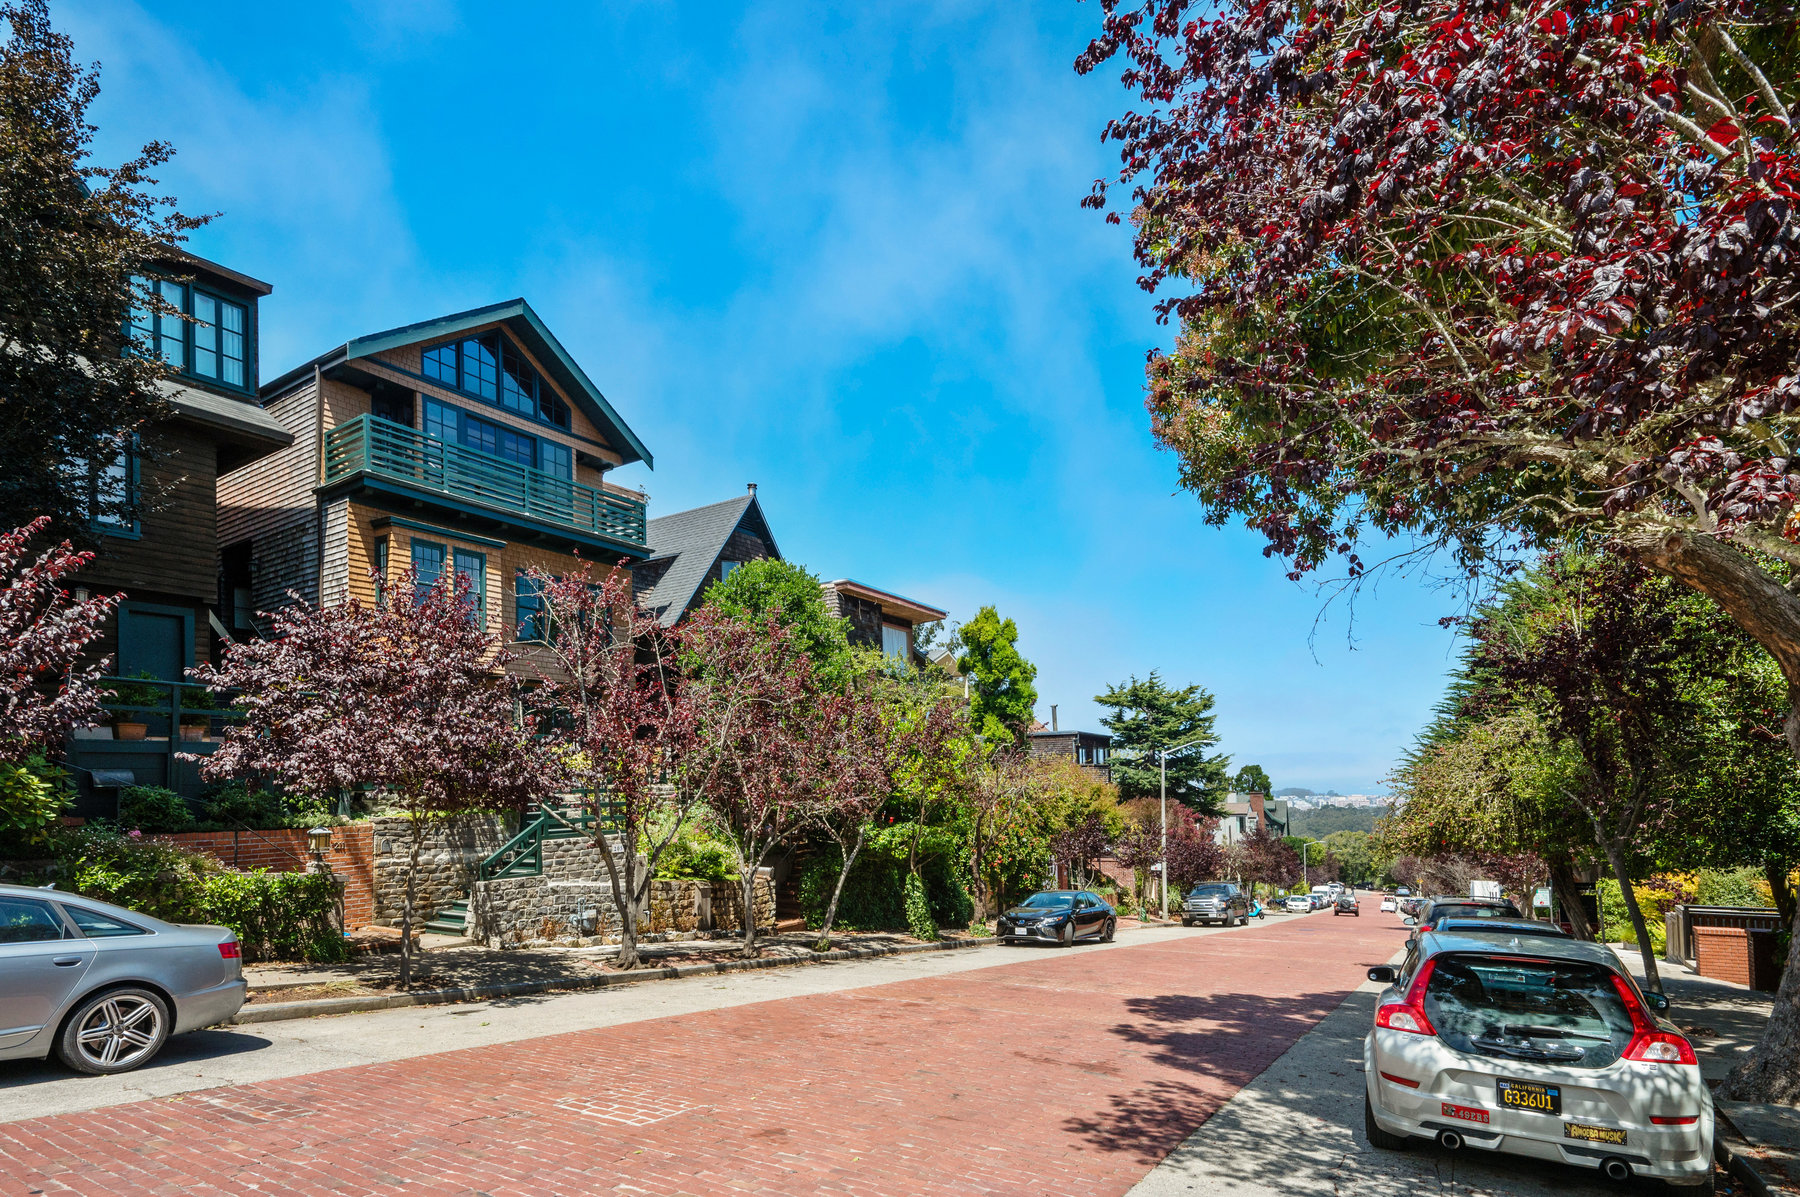 Property Photo: View of Edgewood Street, showing a beautiful cobblestone street with large homes near Golden Gate Park